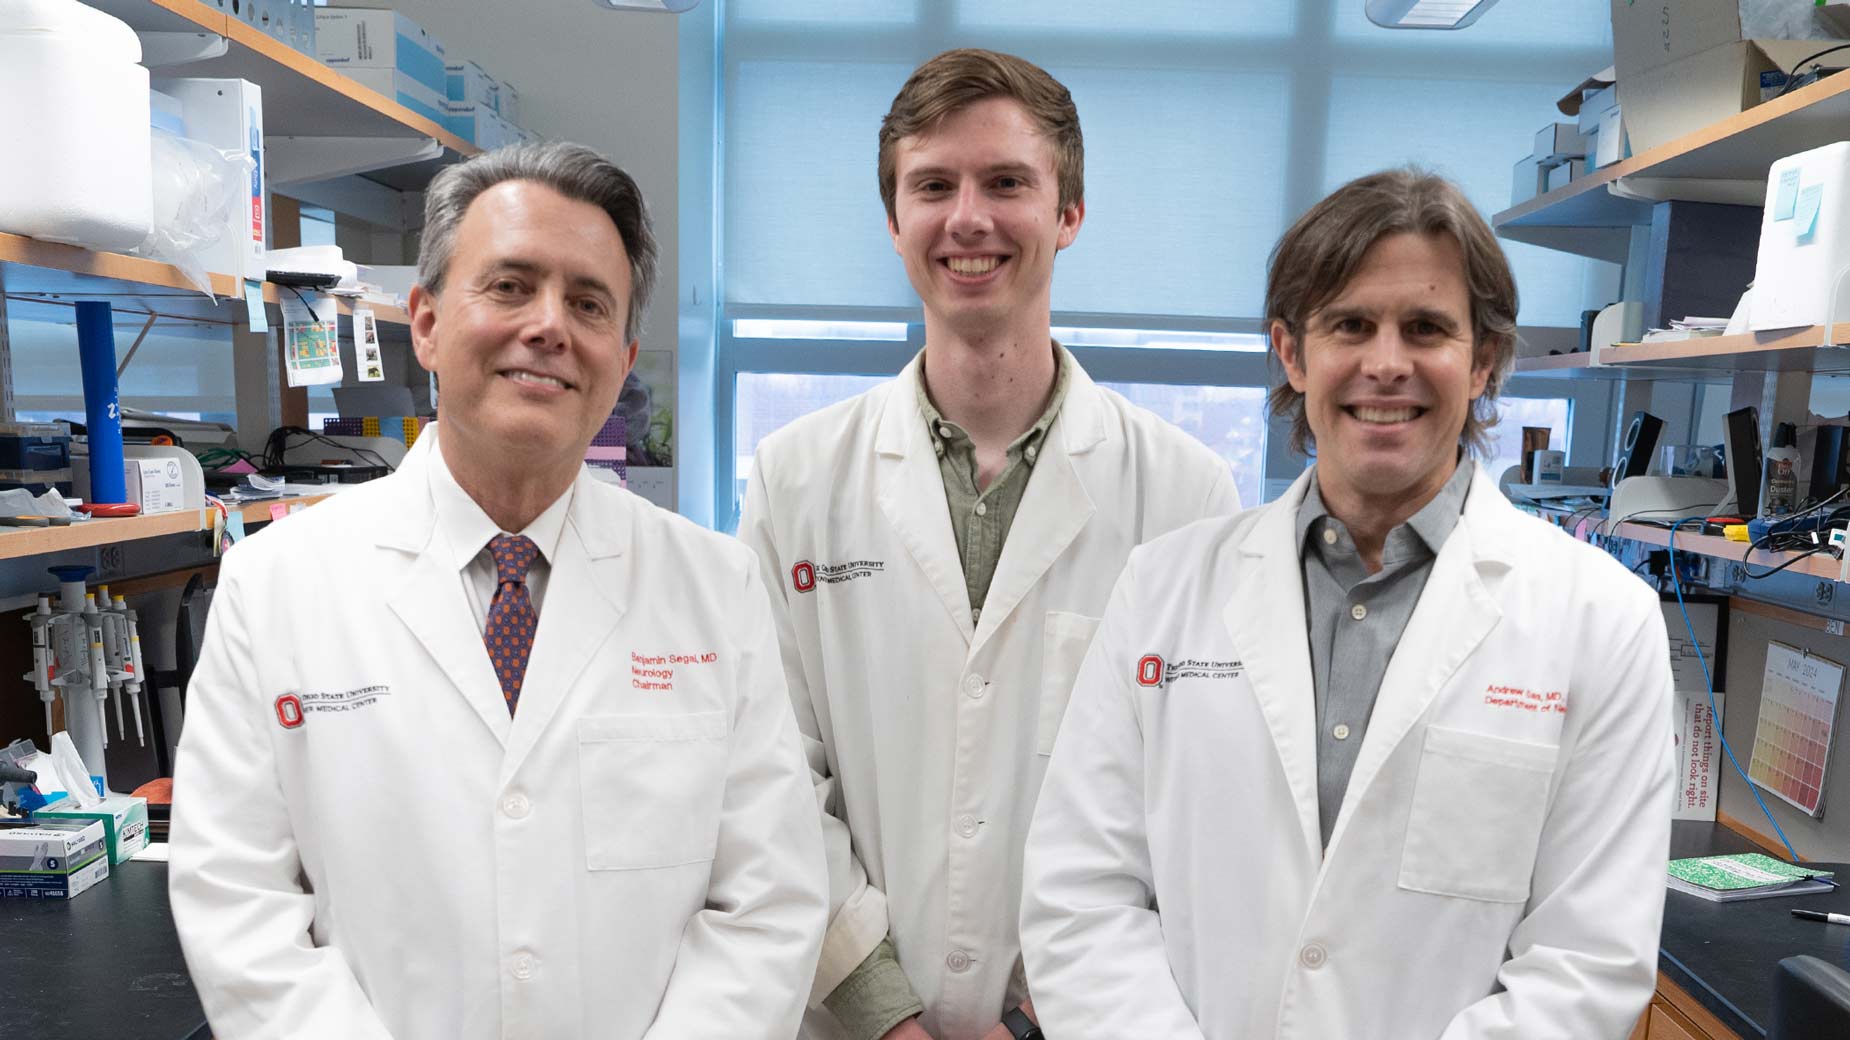 Dr. Benjamin Segal, MD, Dr. Andrew Jerome, PhD, and Dr. Andrew Sas, MD, PhD standing in a medical laboratory for a team picture.